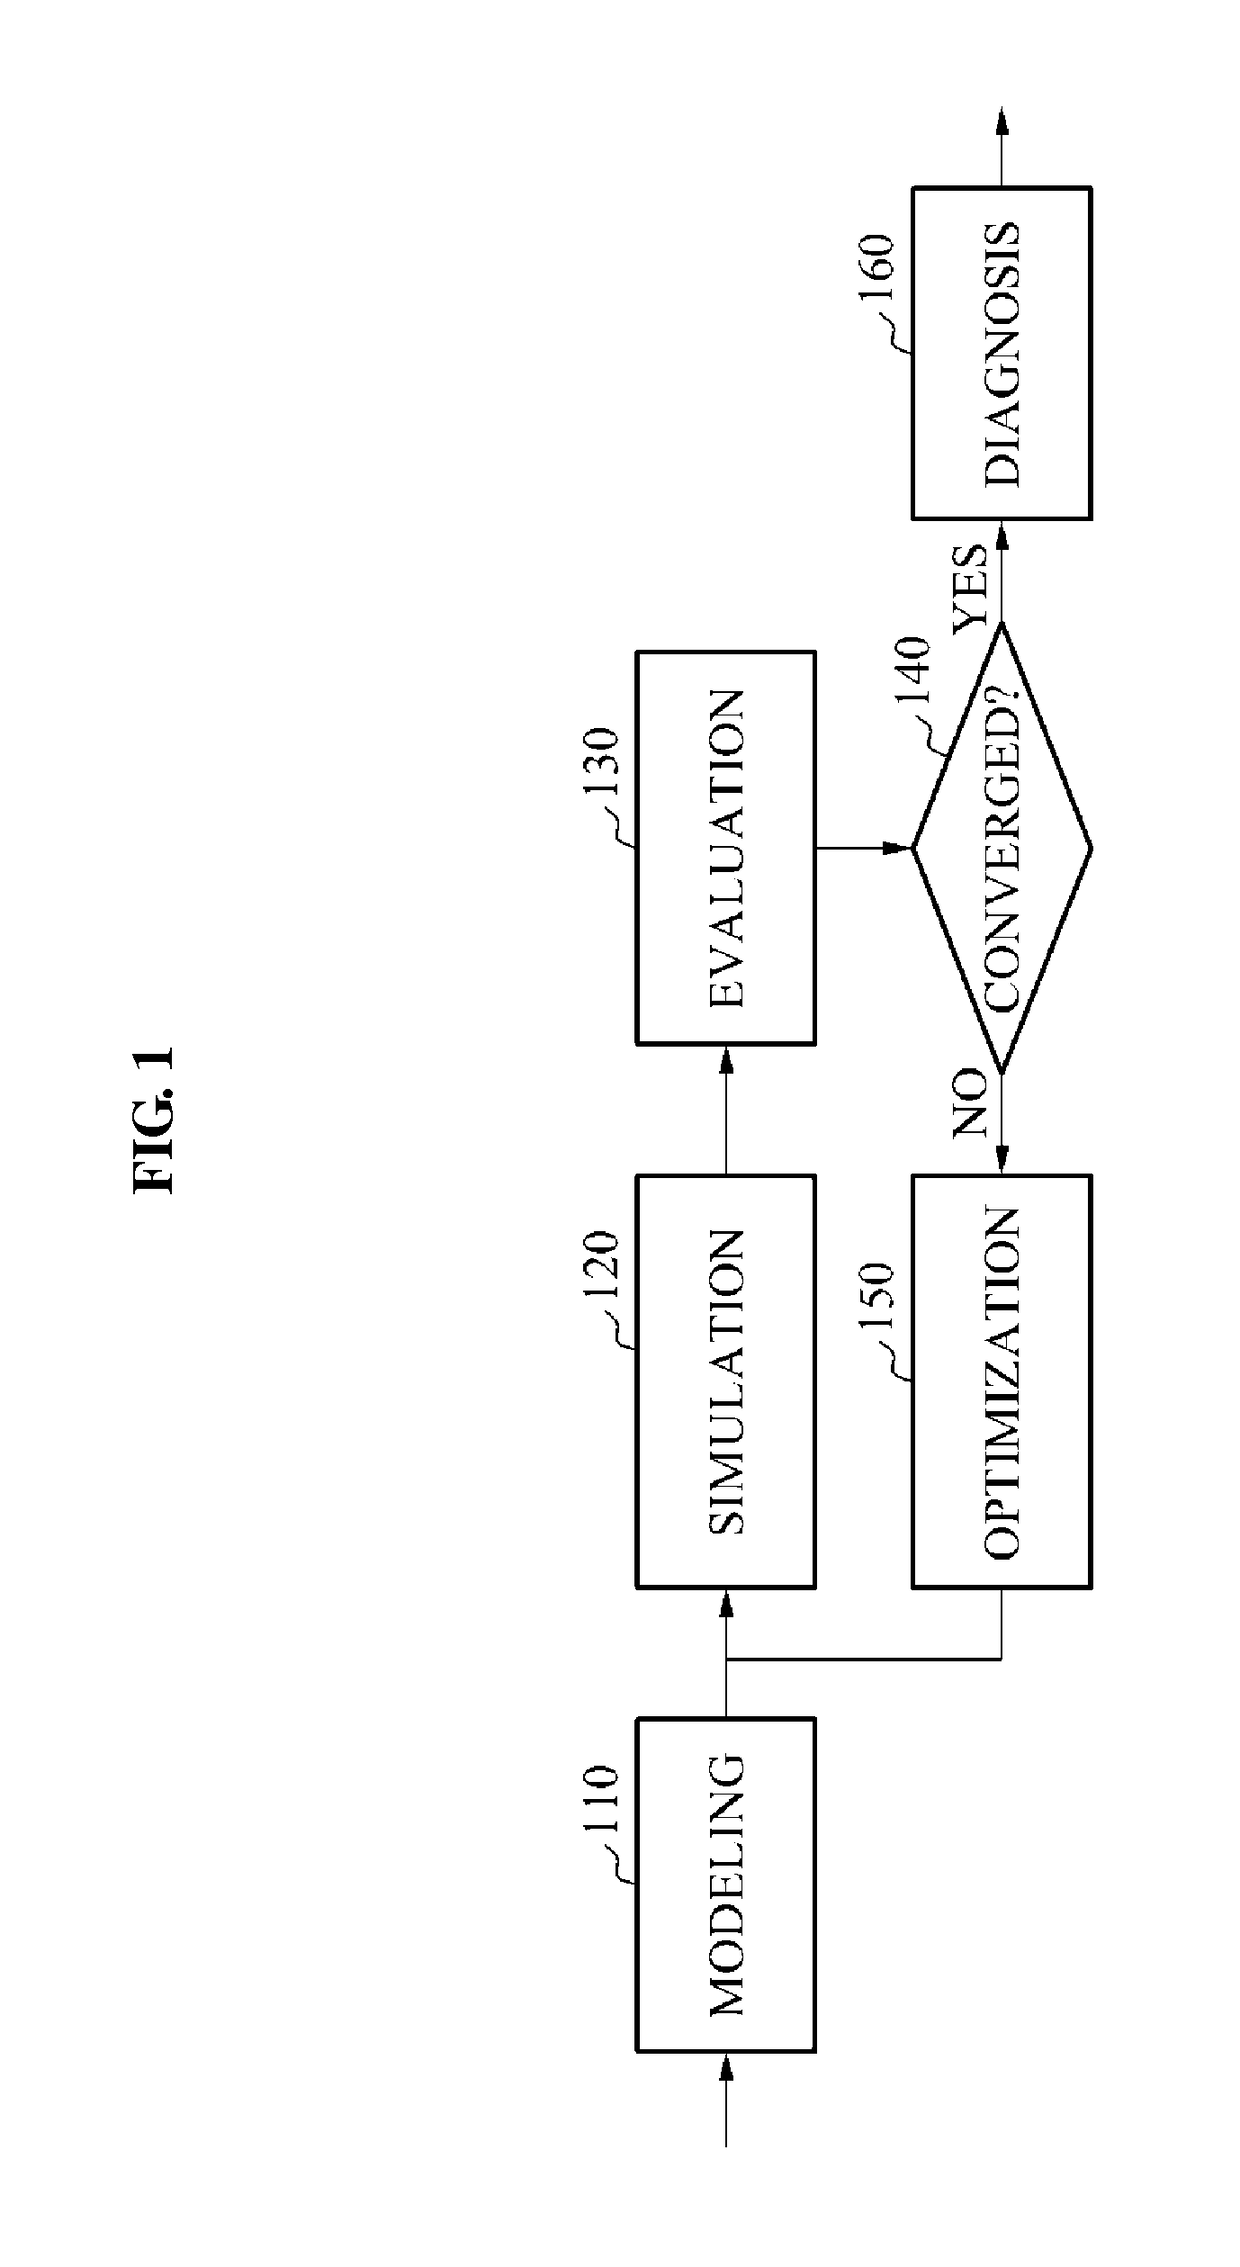 Method and apparatus of diagnosing cardiac diseases based on modeling of cardiac motion